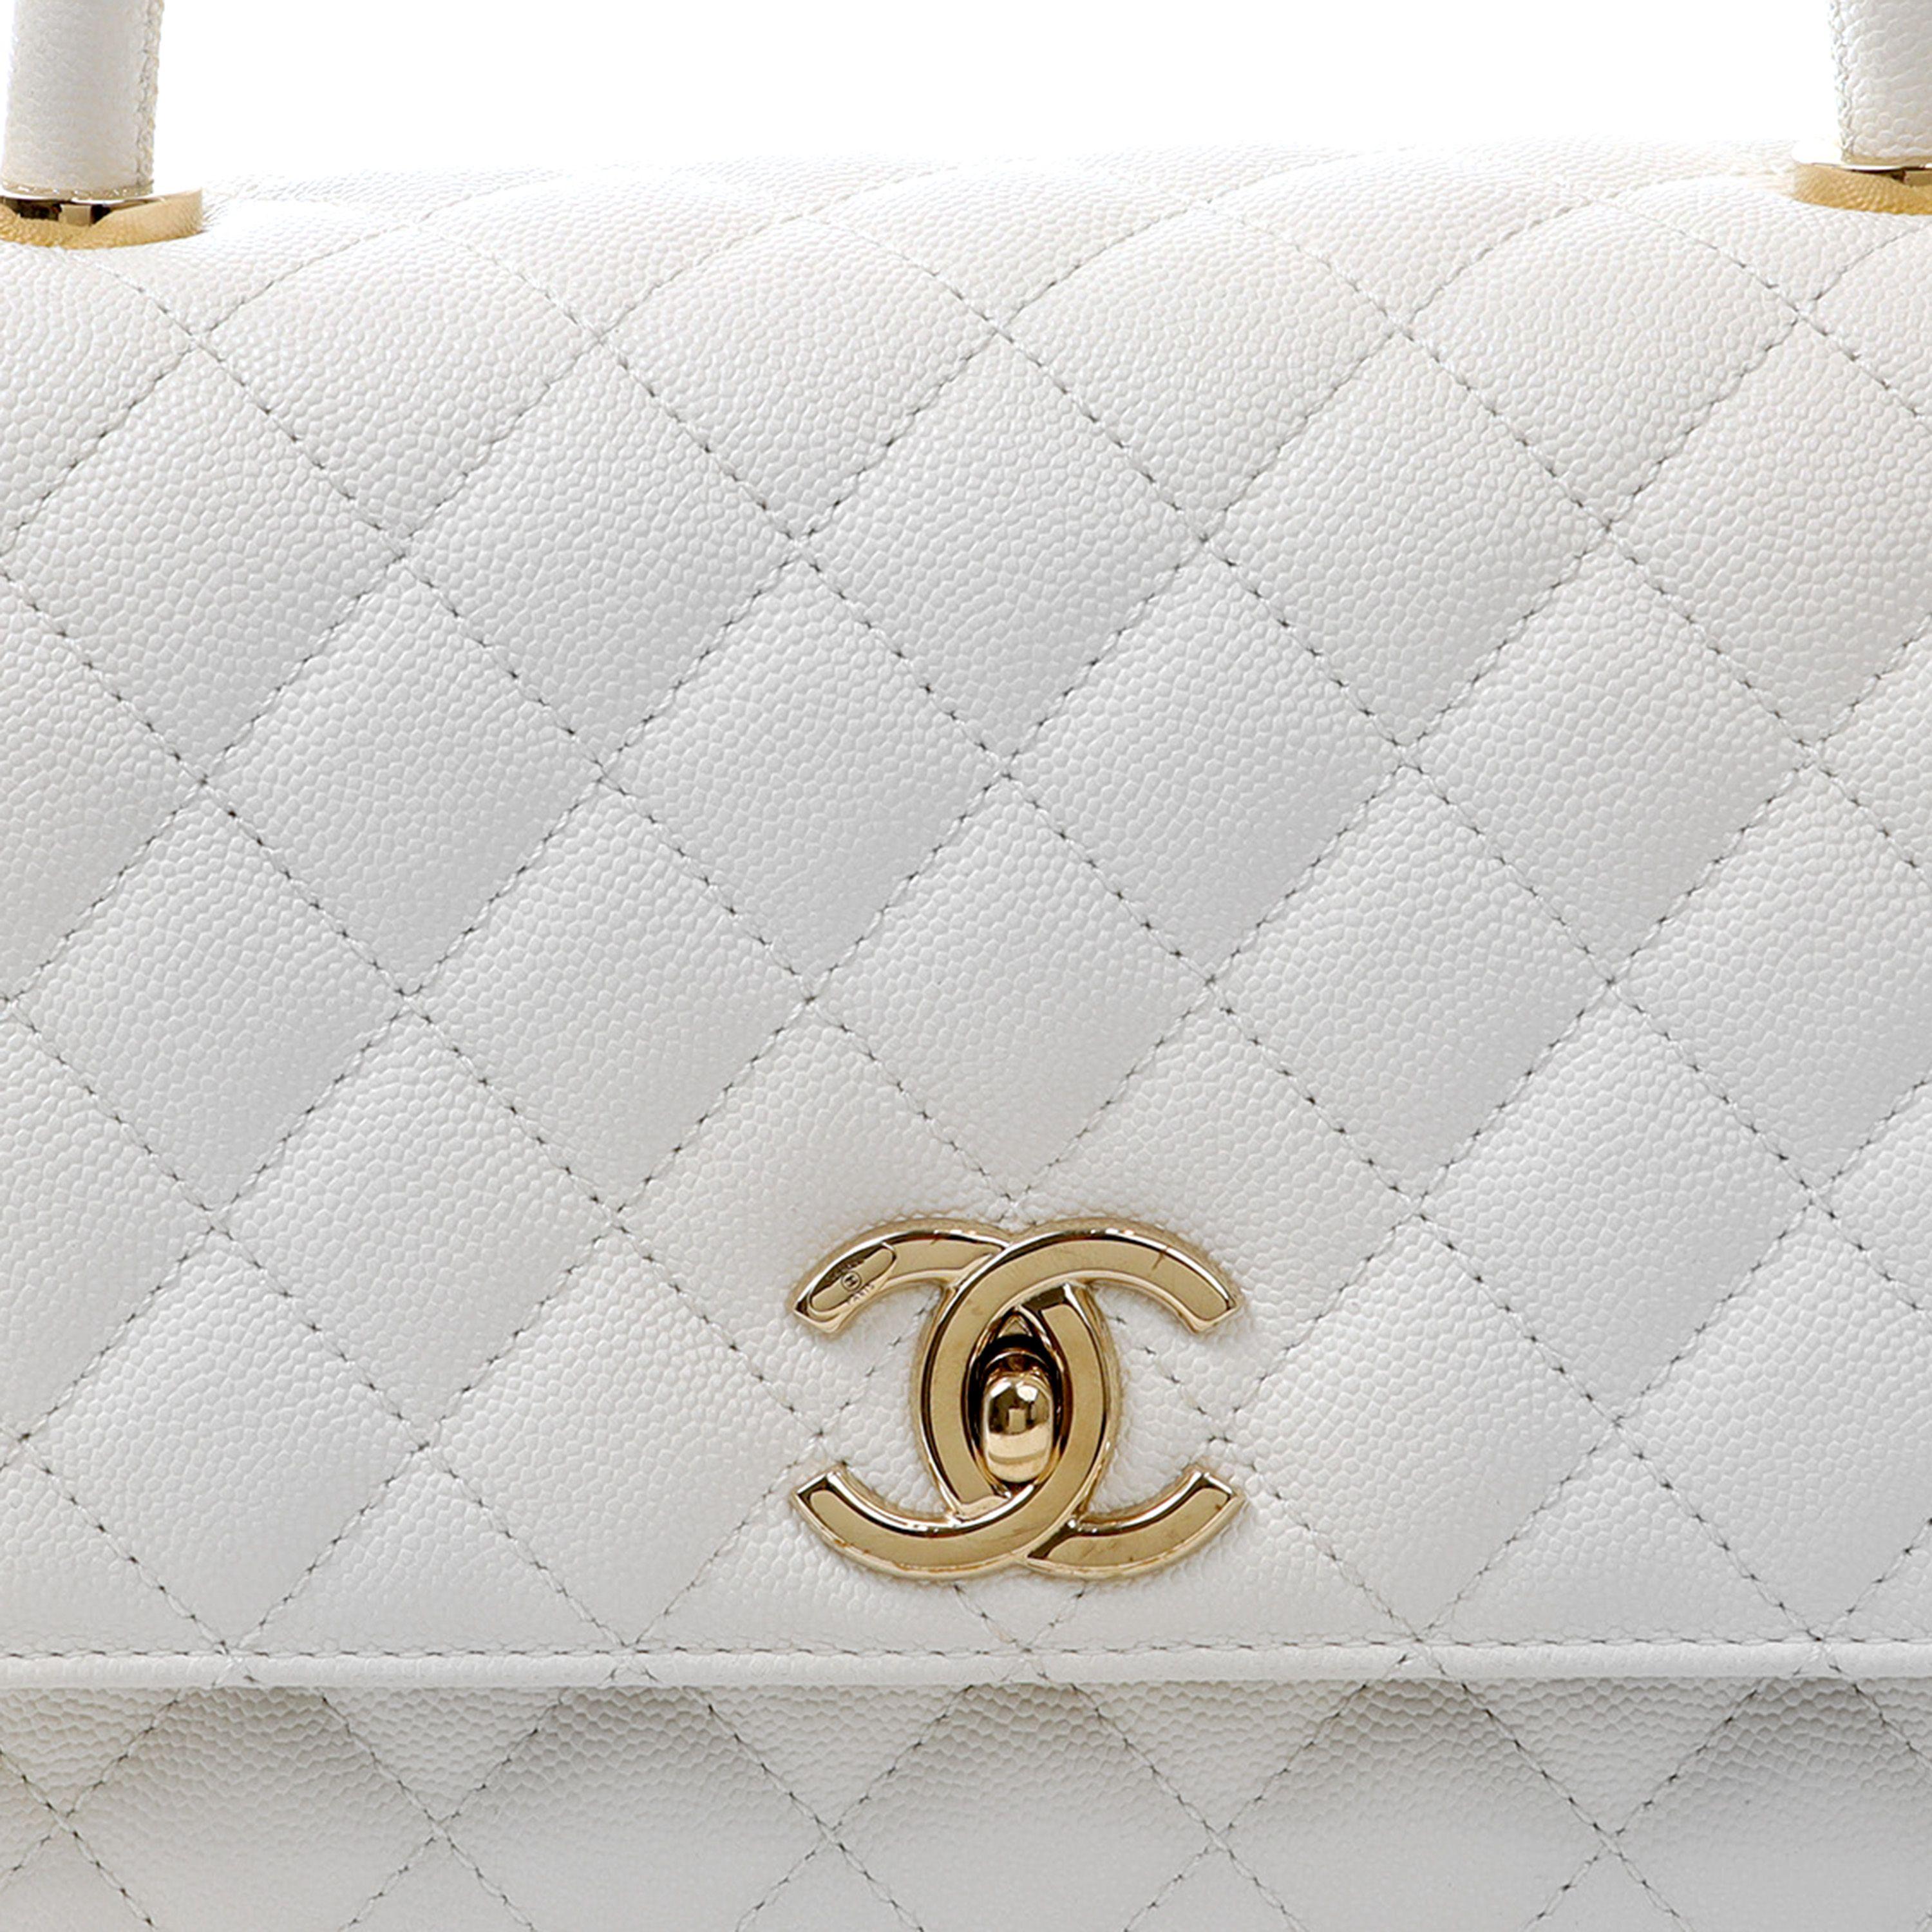 This authentic Chanel White Caviar Large Lady Handle Bag is in pristine condition.  Elegant and sophisticated, the Lady Handle is an exquisite departure from the Classic Flap silhouette. 

Textured snowy white caviar leather is quilted in signature